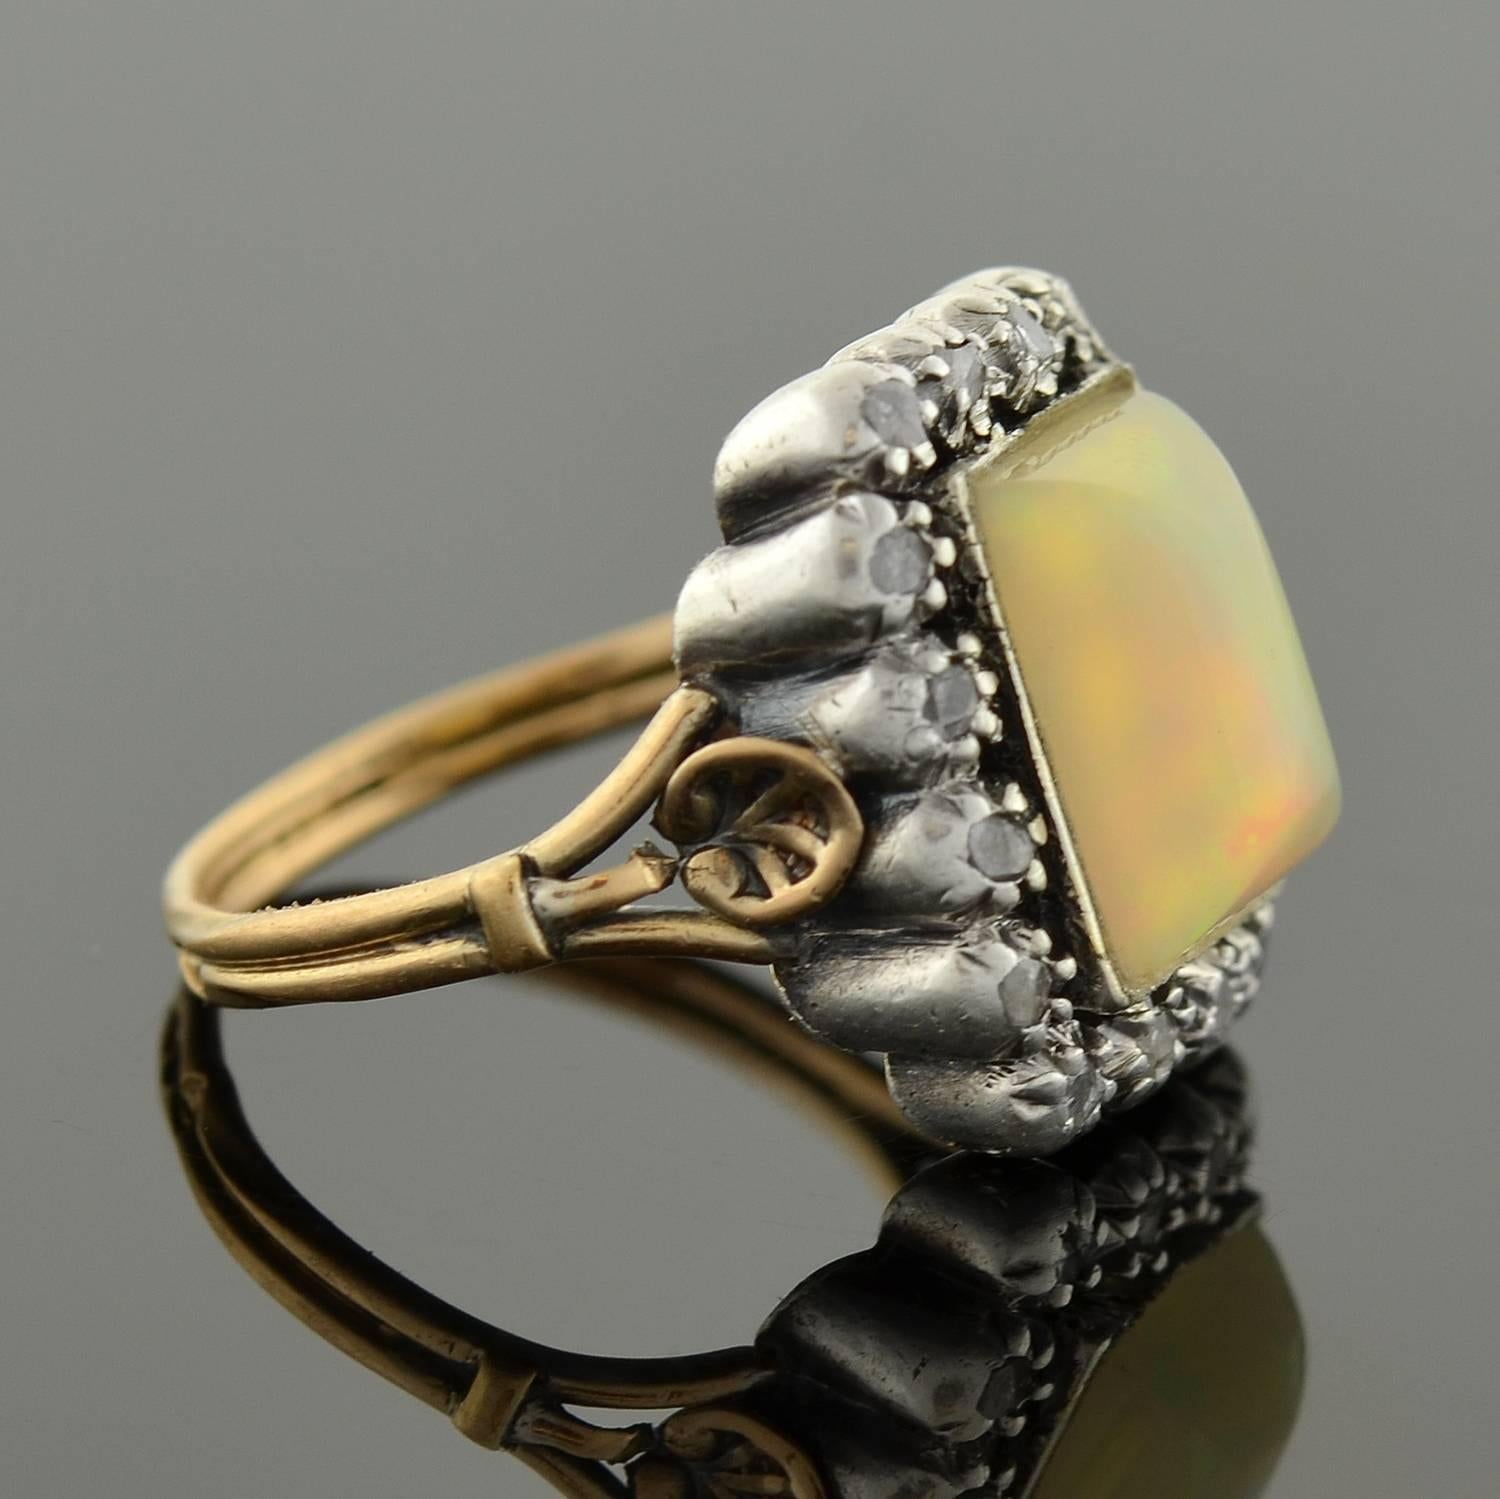 An enchanting opal ring from the Victorian (ca1880) era! This gorgeous ring is crafted in 18kt gold topped in sterling. An alluring white opal rests at the center, surrounded by a sparkling rose cut diamond border. The opal is simply mesmerizing,